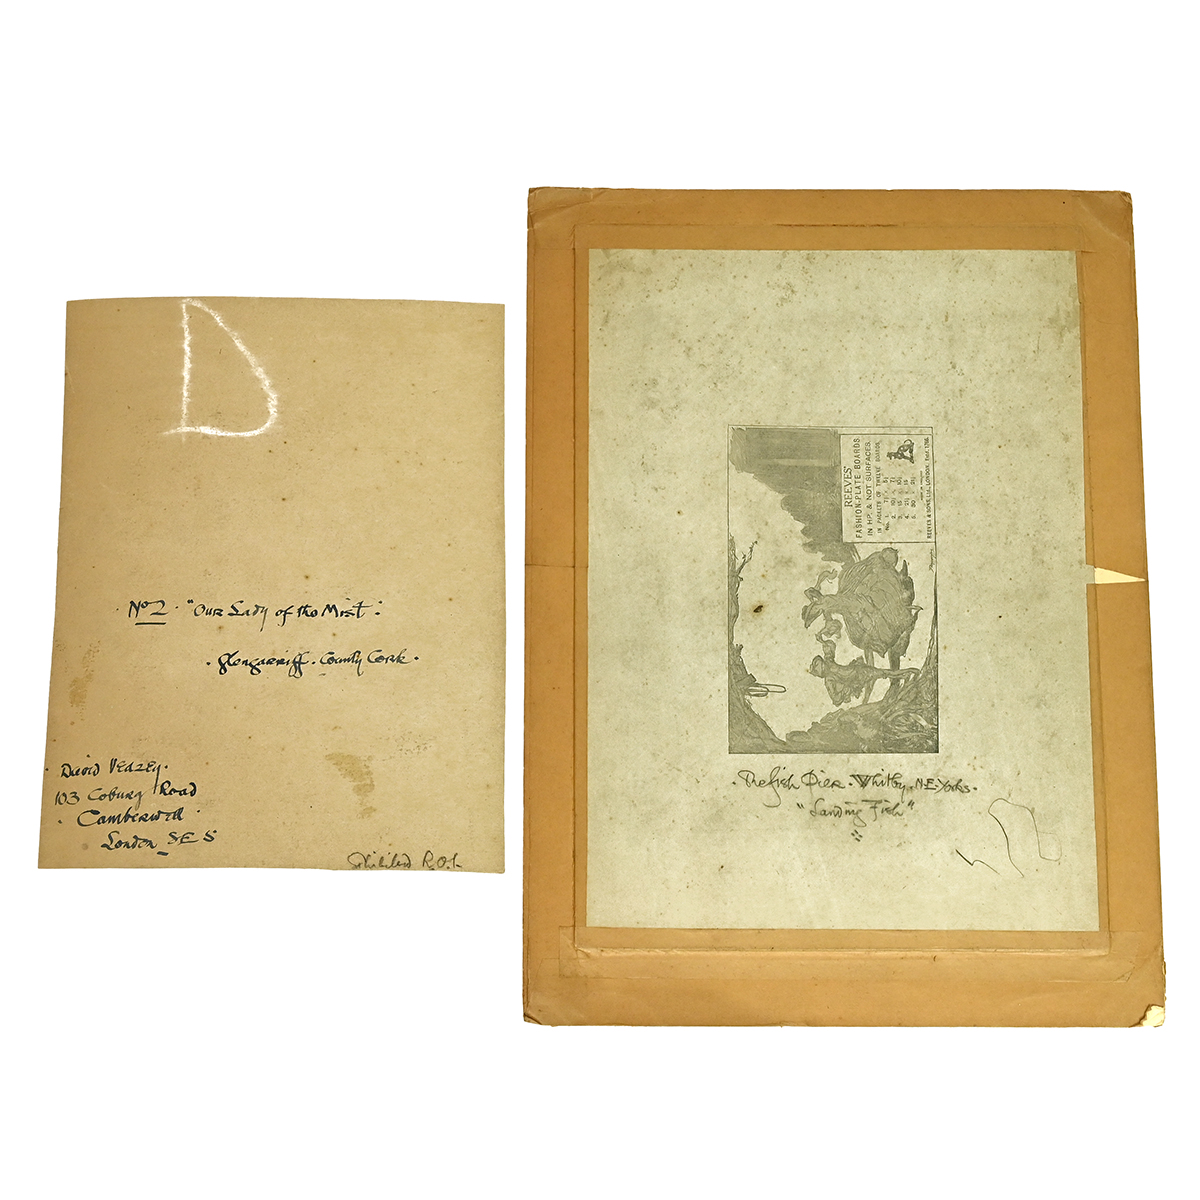 A folio of family drawings with inscriptions by the amateur artist David Veasey, brother of the R...